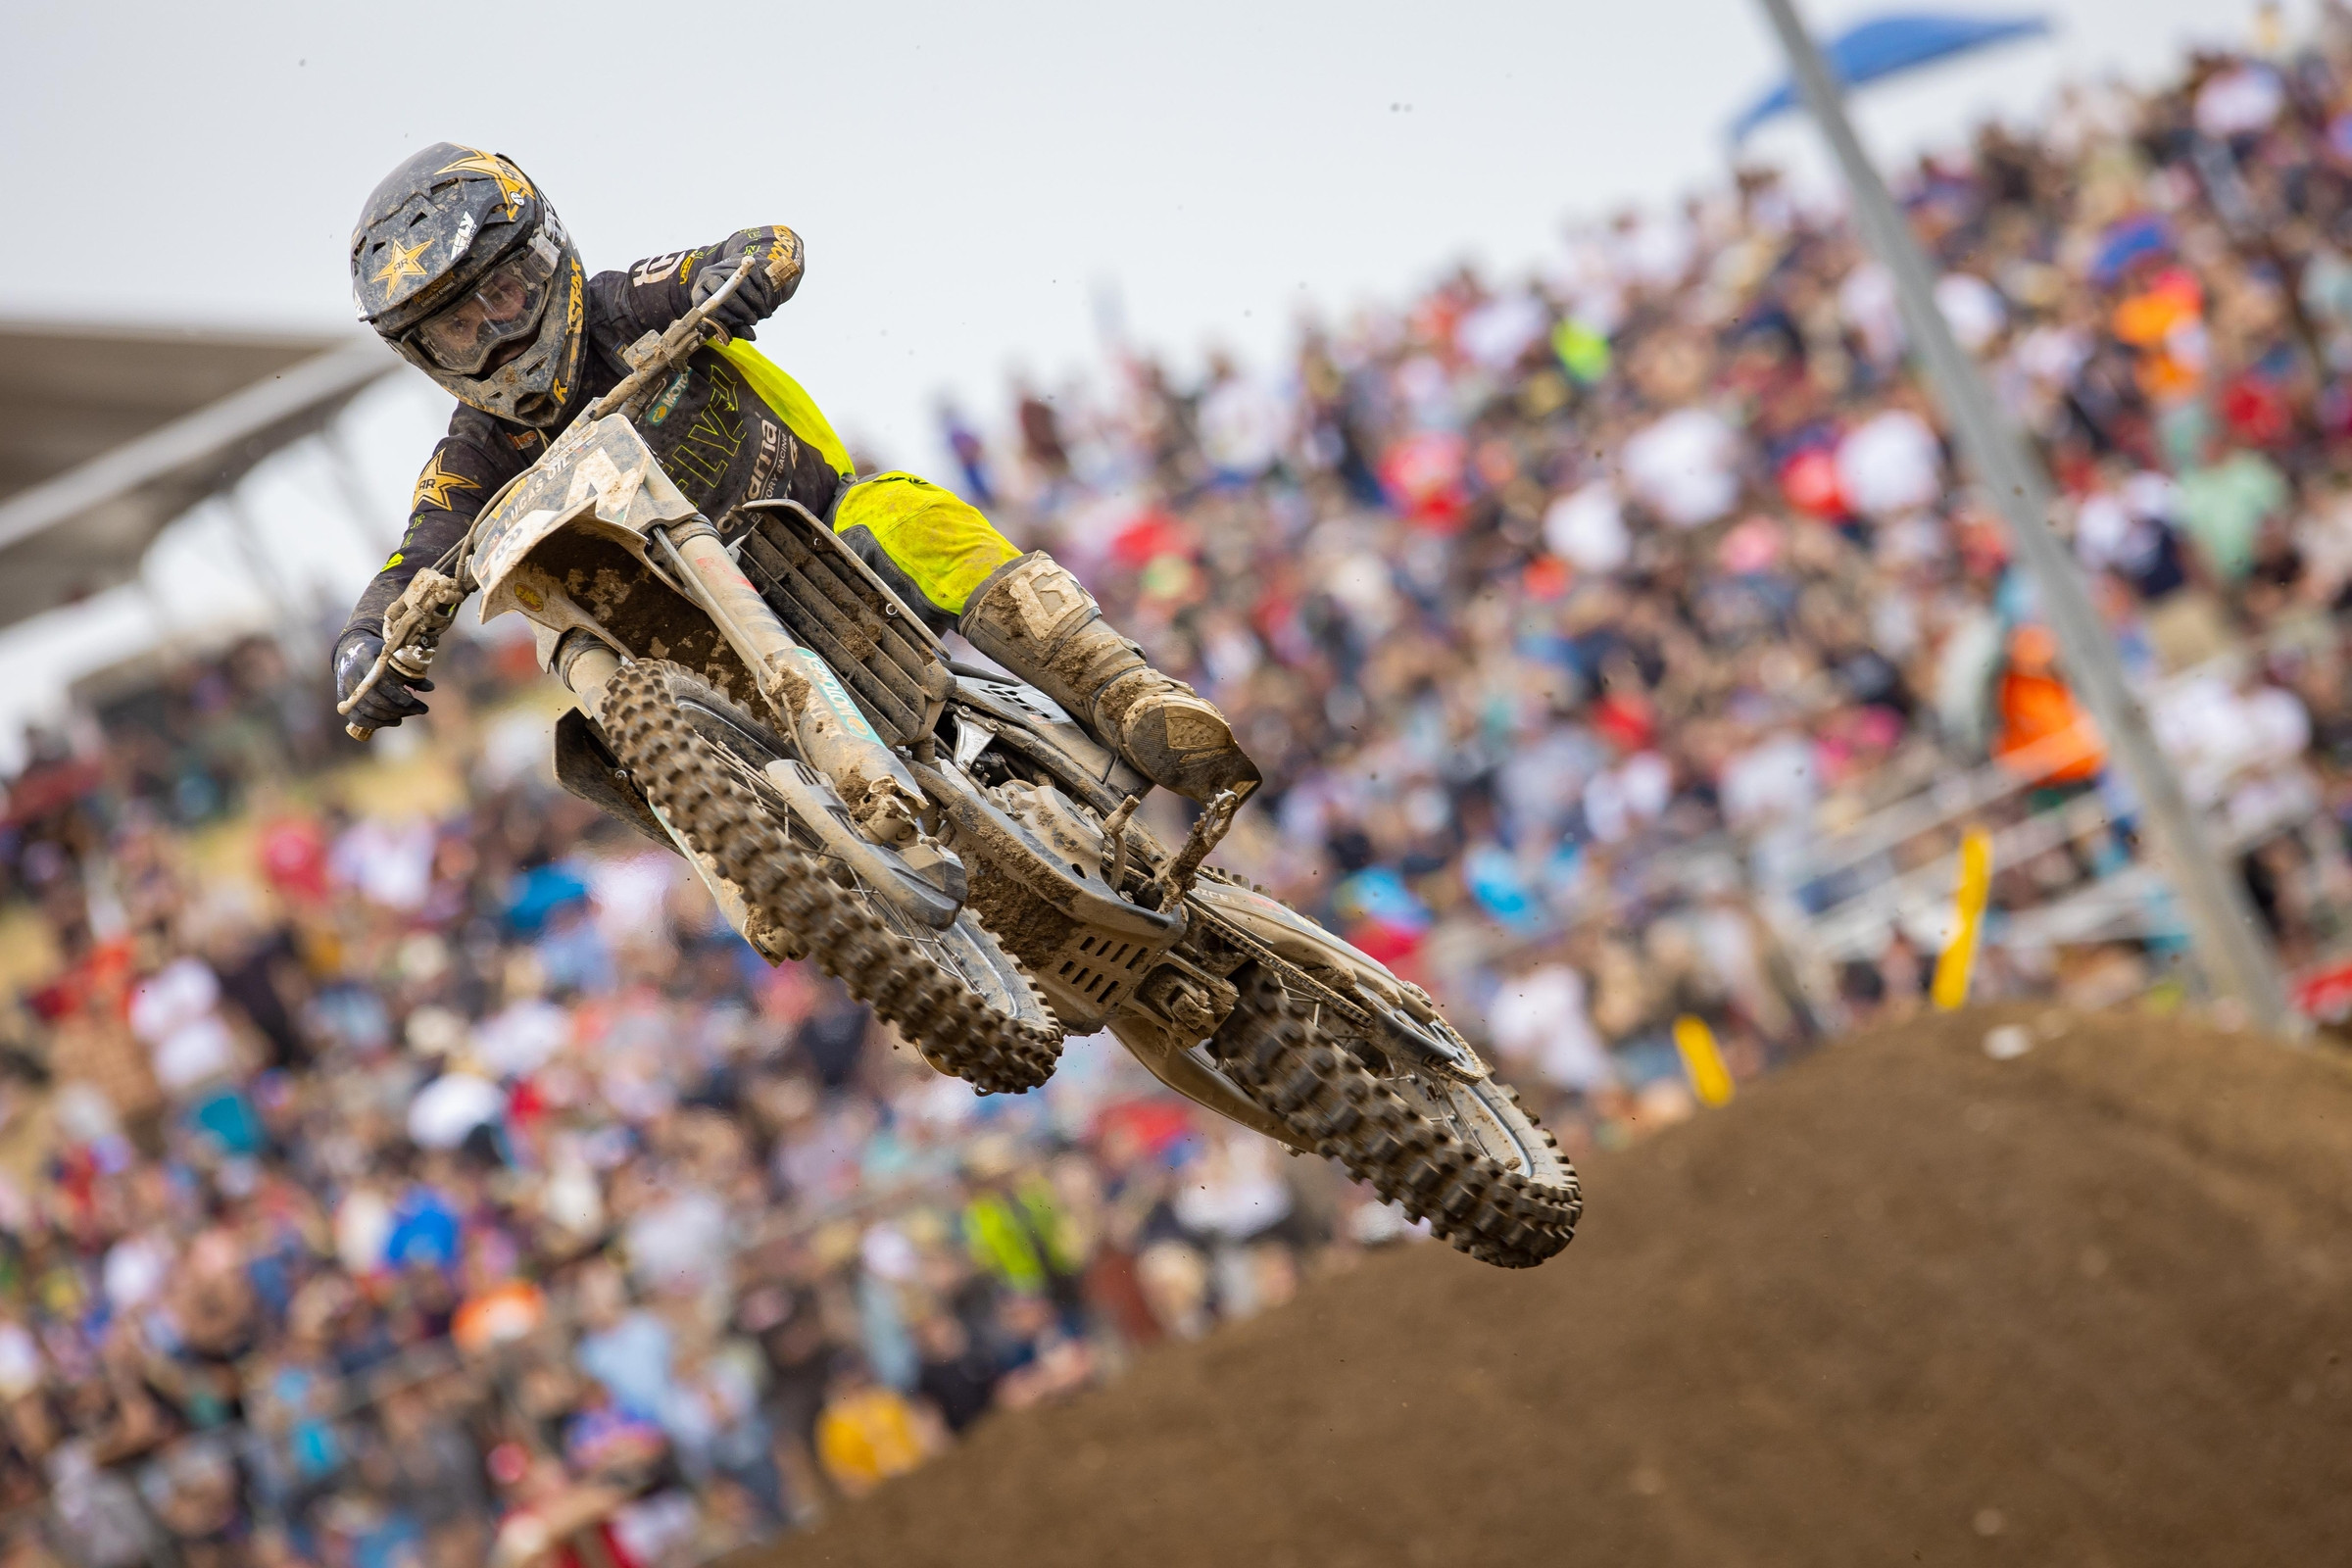 RJ Hampshire Provides Injury Update Following Hangtown National 